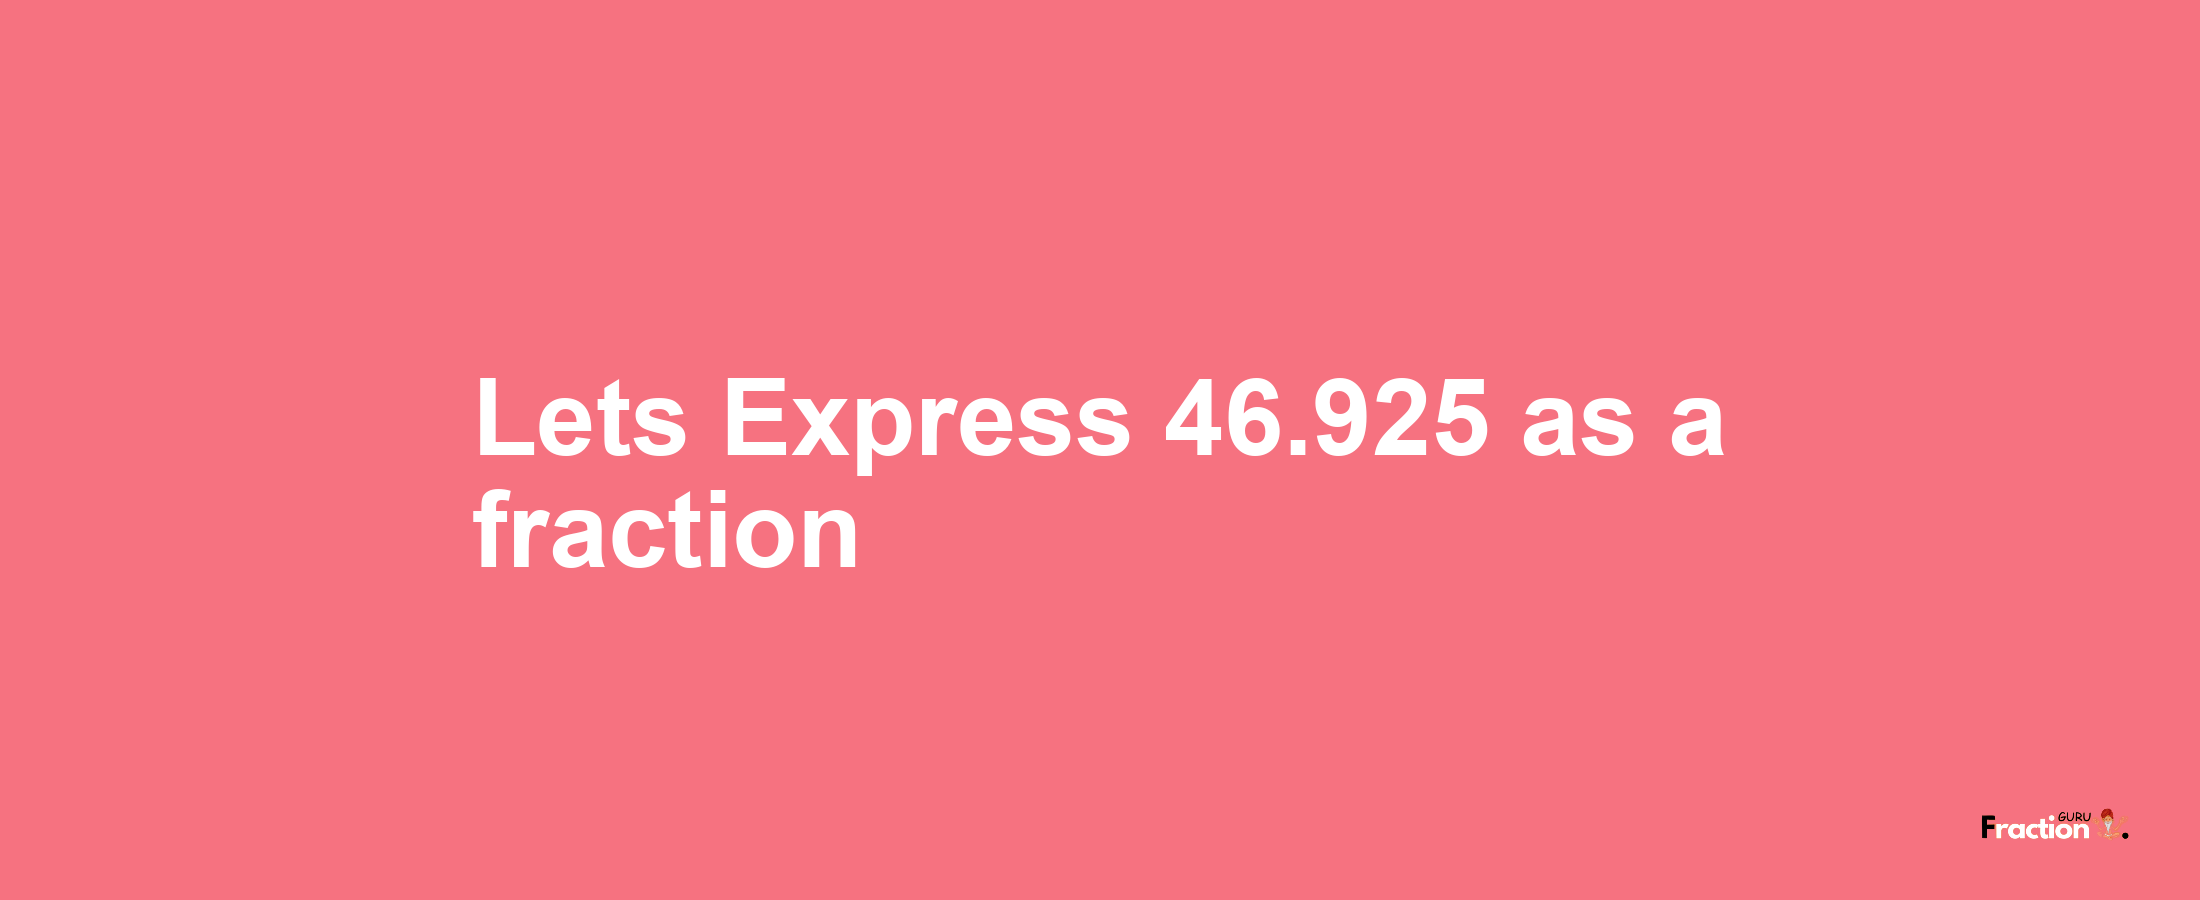 Lets Express 46.925 as afraction